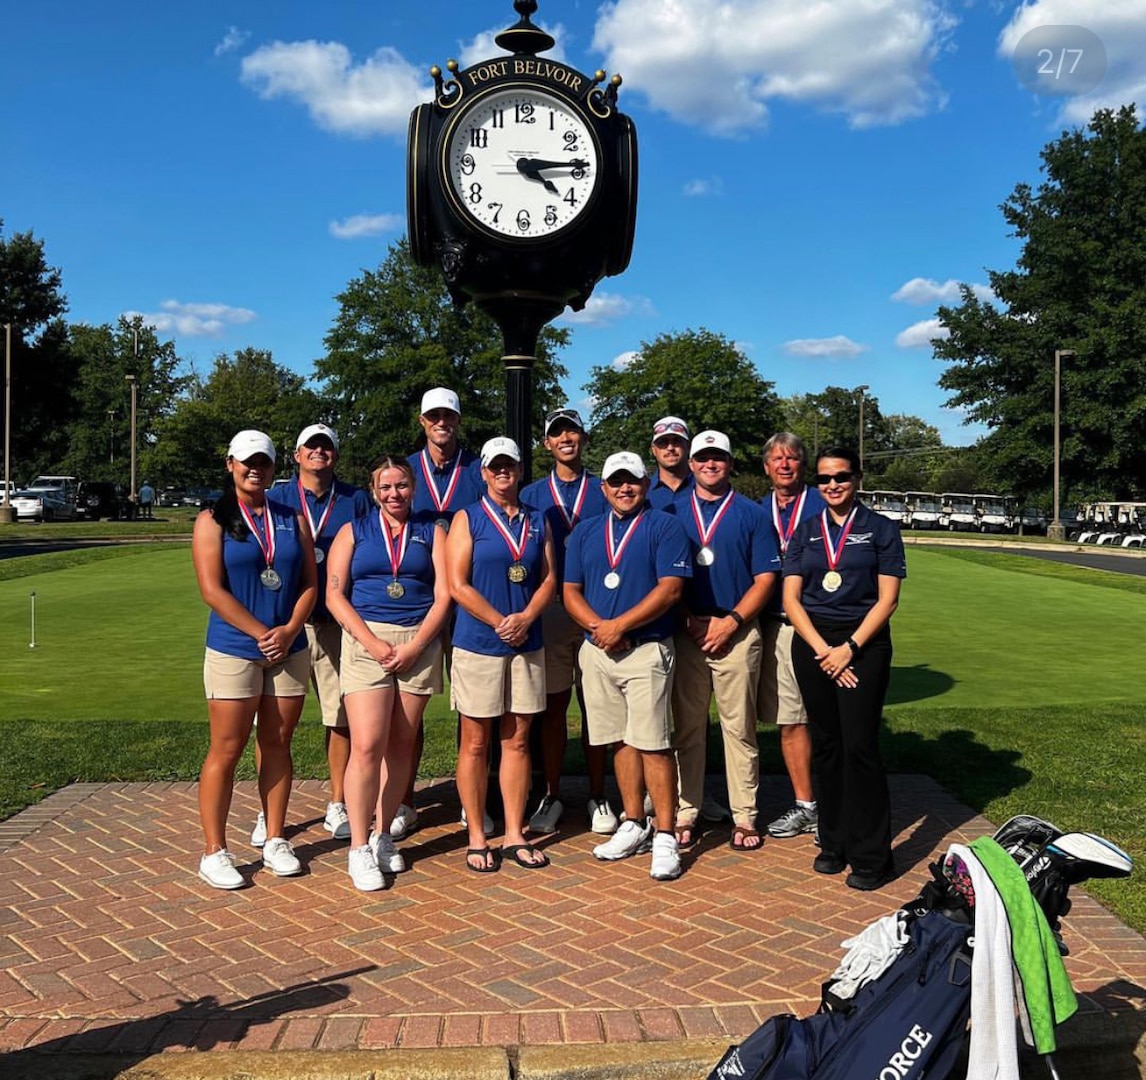 Air Force women and Air Force men capture team gold and silver respectively during the 2022 Armed Forces Golf Championship hosted by Army at Fort Belvoir, Virgina.  Championship features teams from the Army, Marine Corps, Navy (with Coast Guard players), and Air Force (with Space Force players).  Department of Defense Photo by Mr. Steven Dinote - Released.